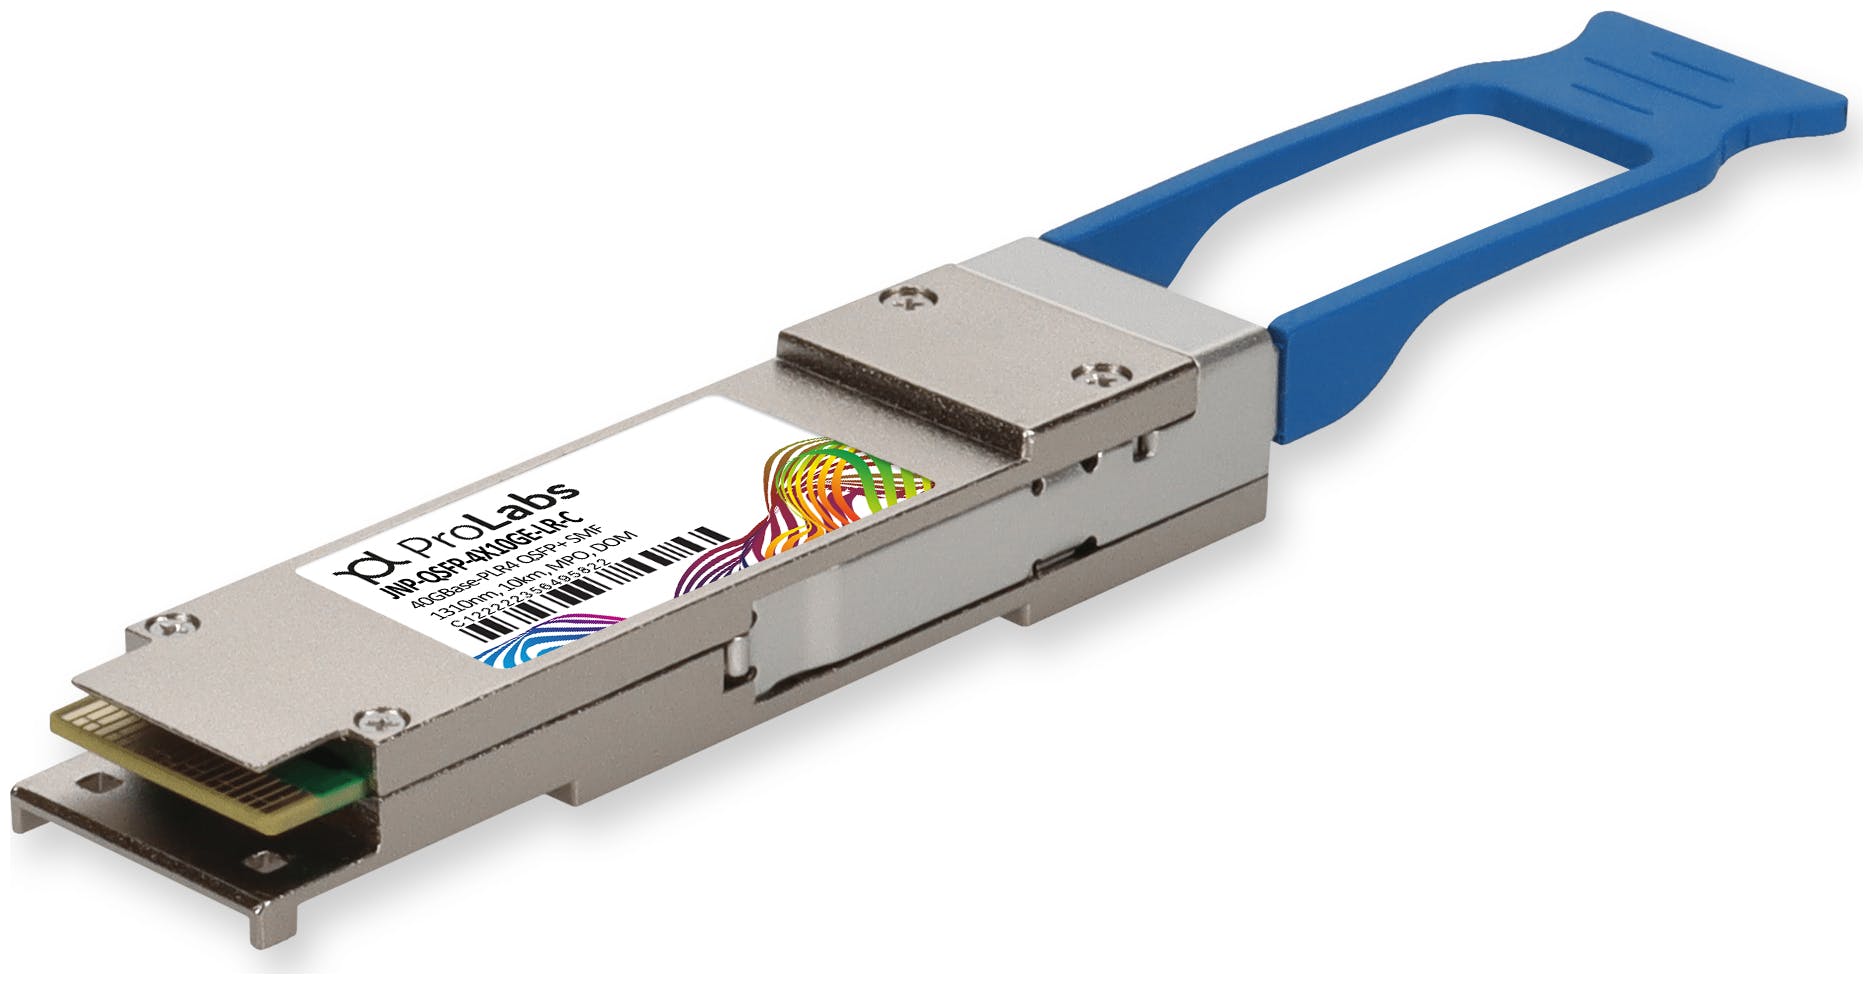 OSFP vs QSFP-DD: The Wave of the Future 400G Transceiver